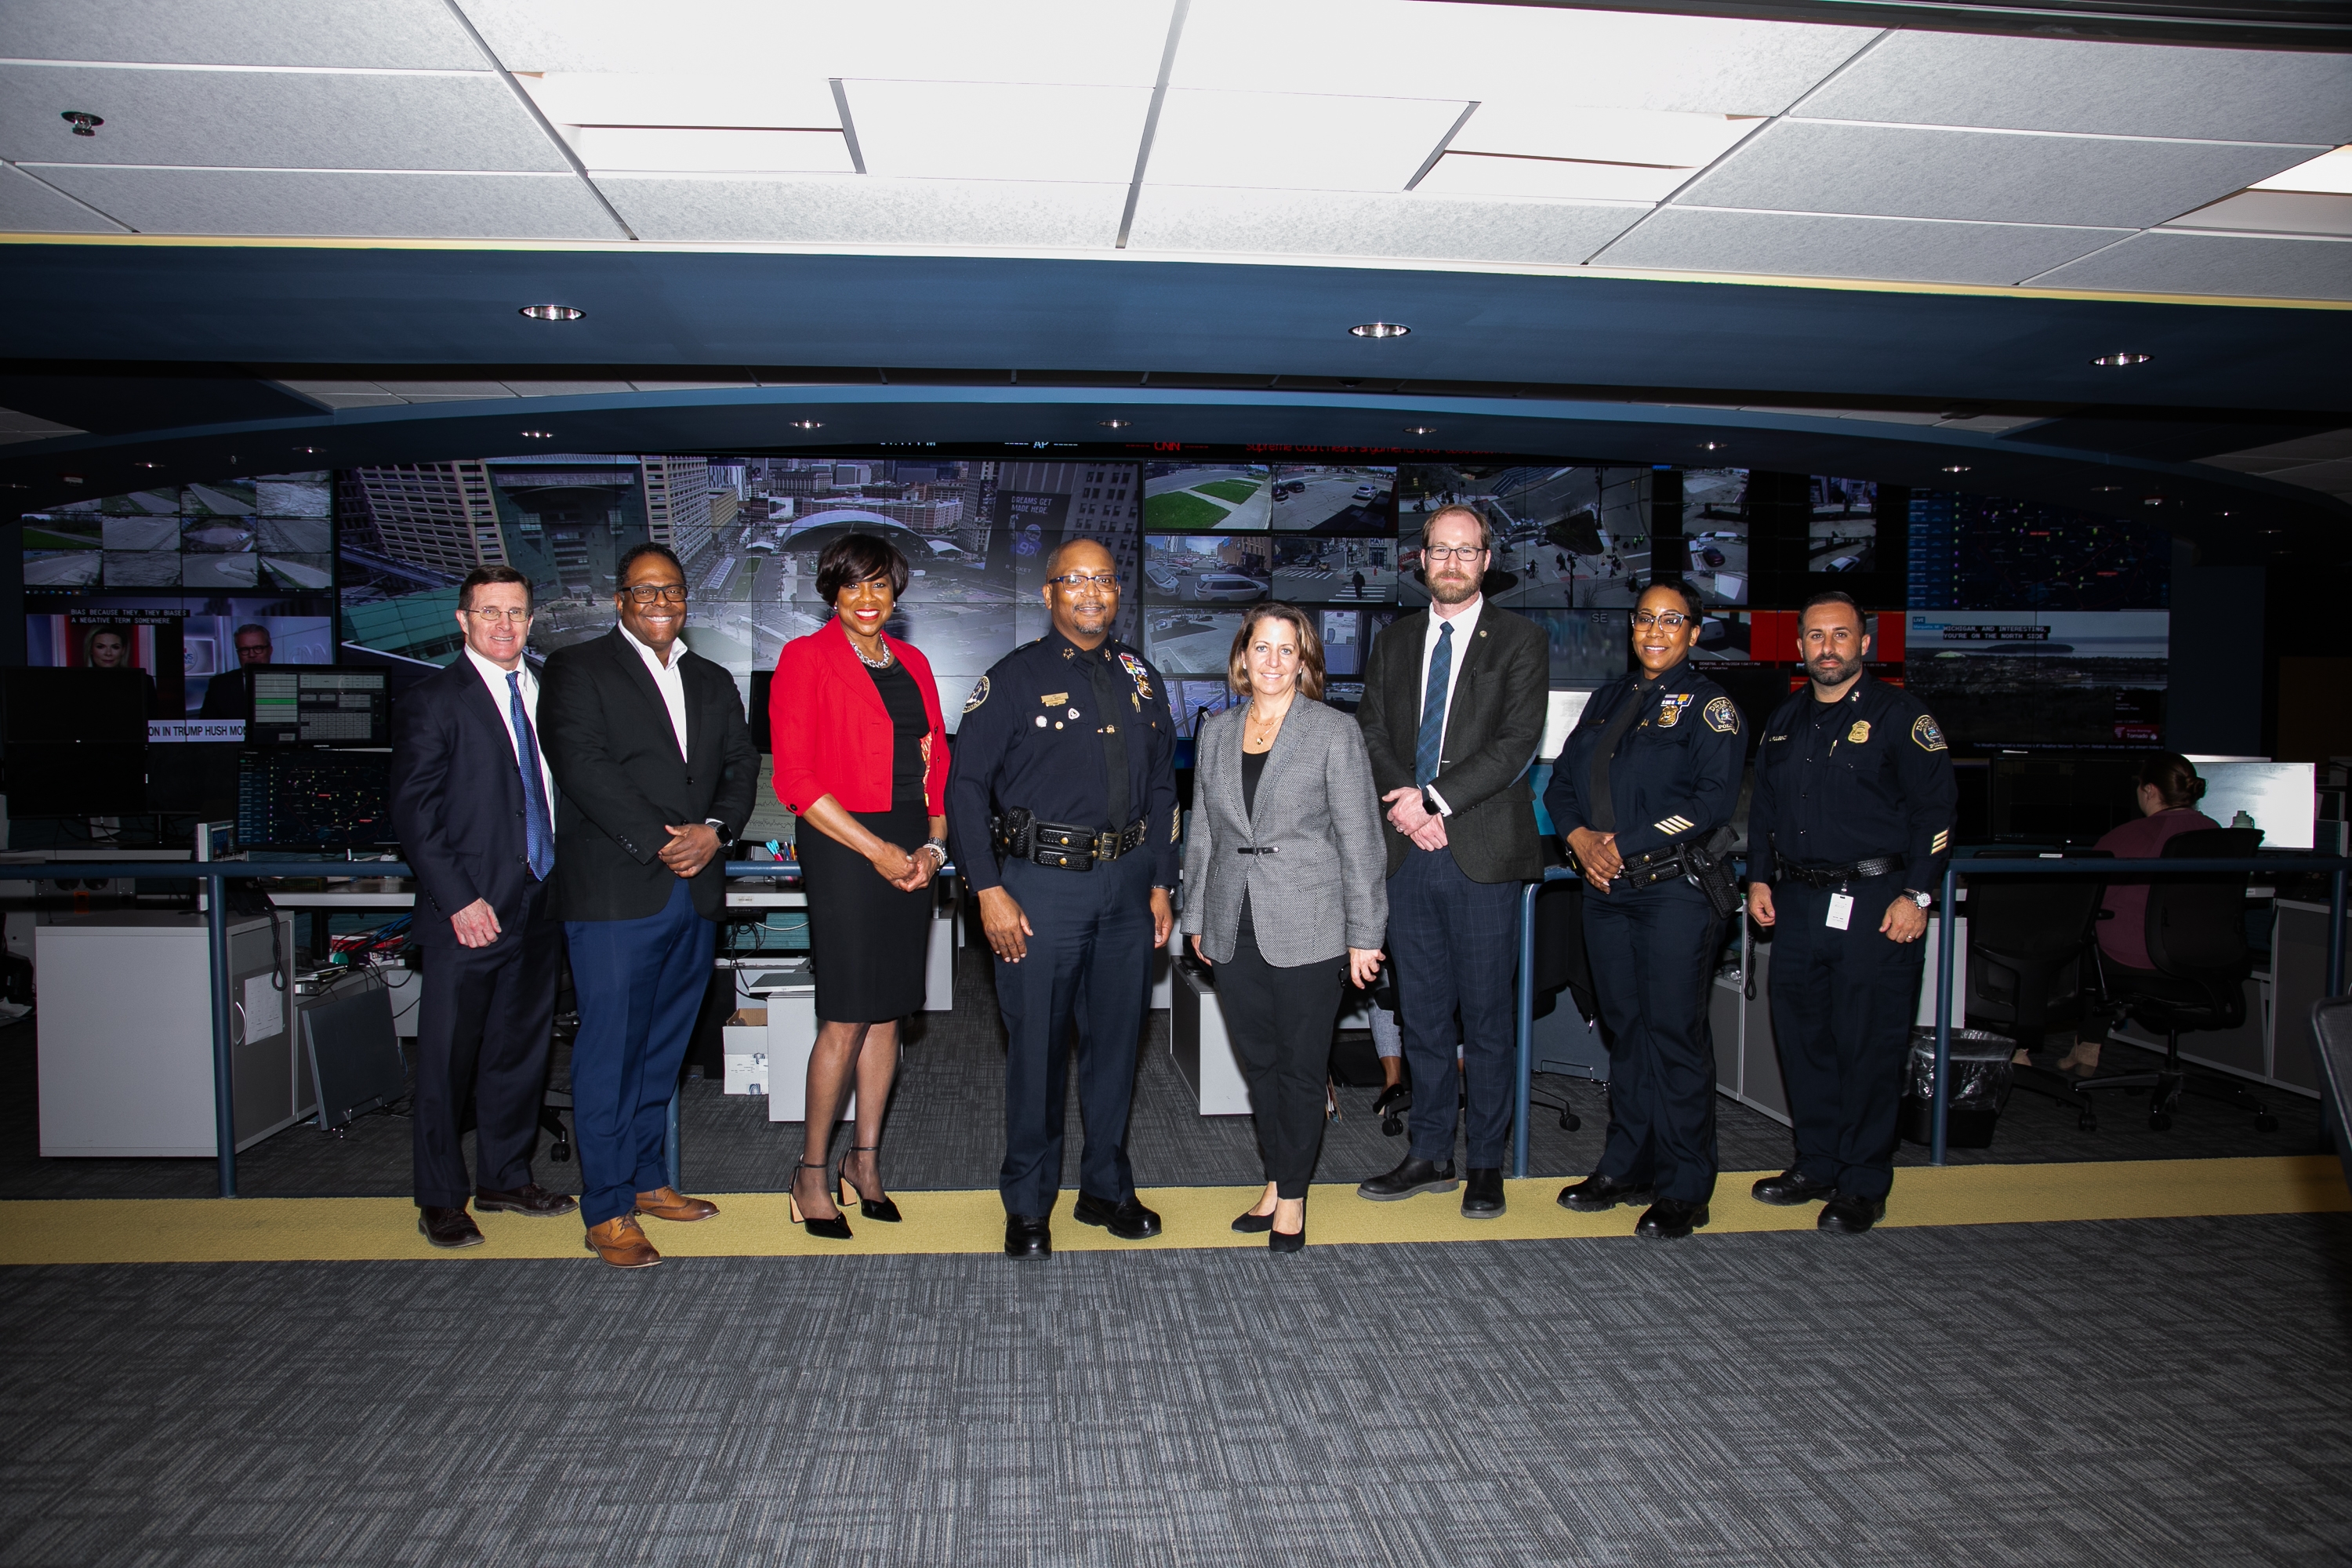 Deputy AG Monaco with U.S. Attorney Ison, Detroit Police Chief James White, and other city and law enforcement officials at the Detroit Police Department's Real-Time Crime Center.